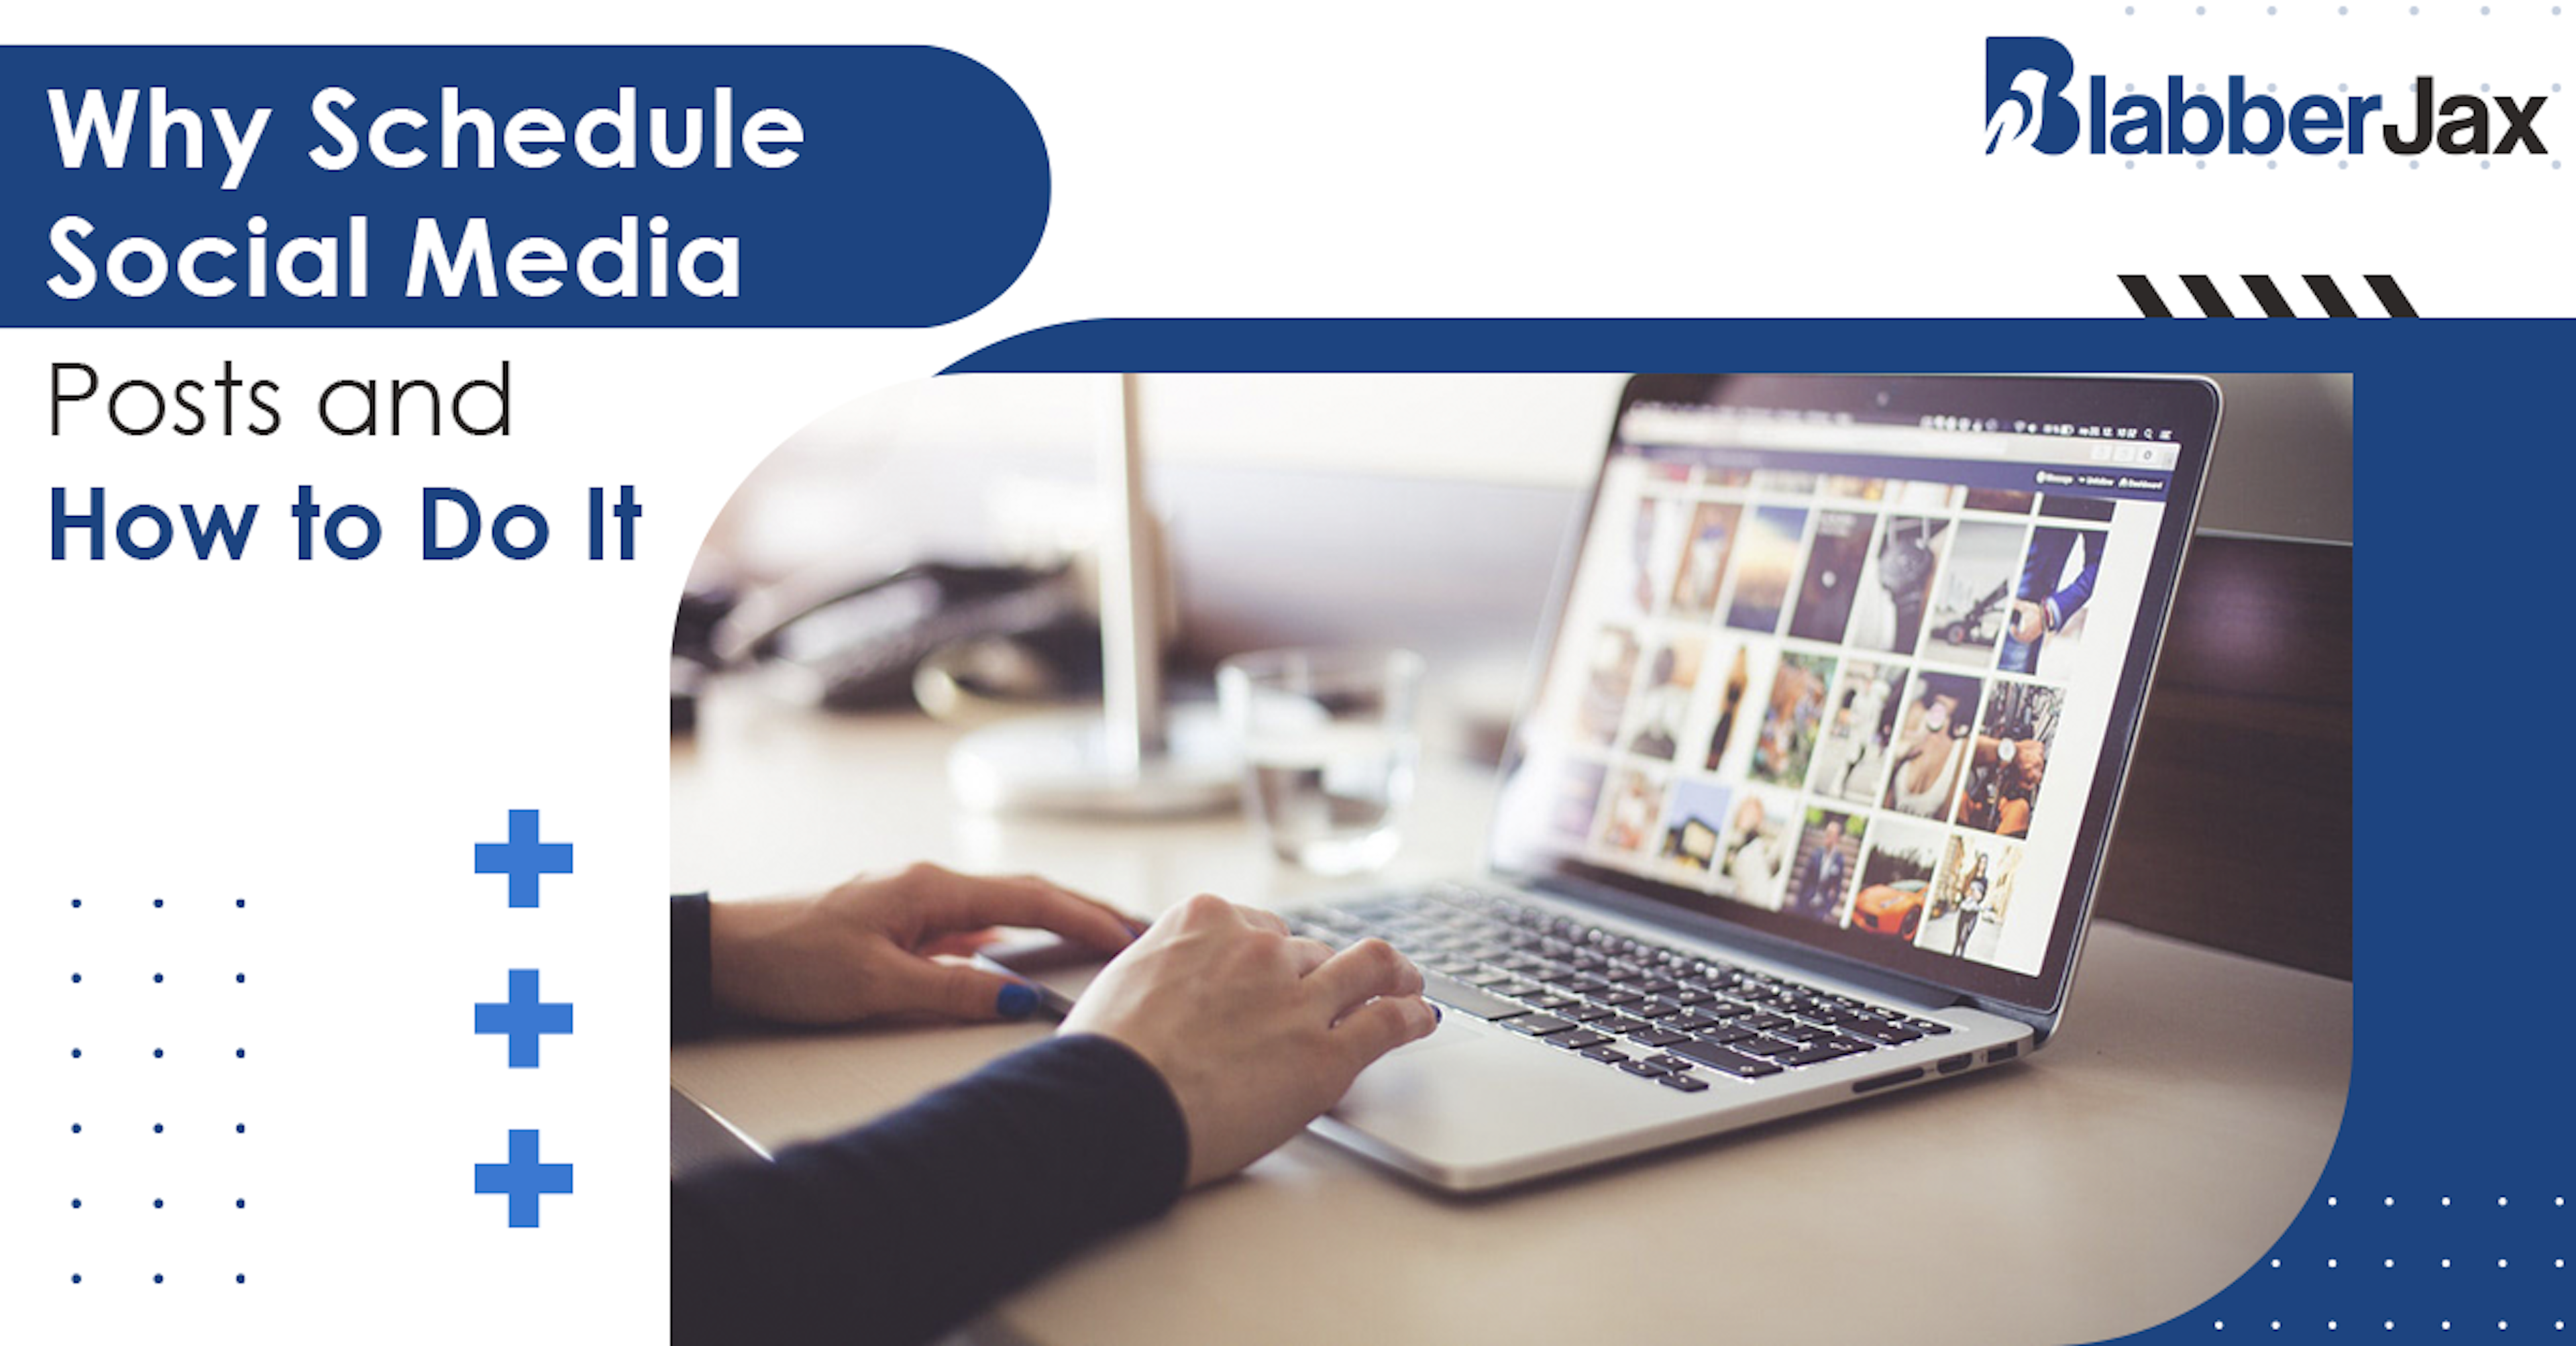 Why Schedule Social Media Posts and How to Do It